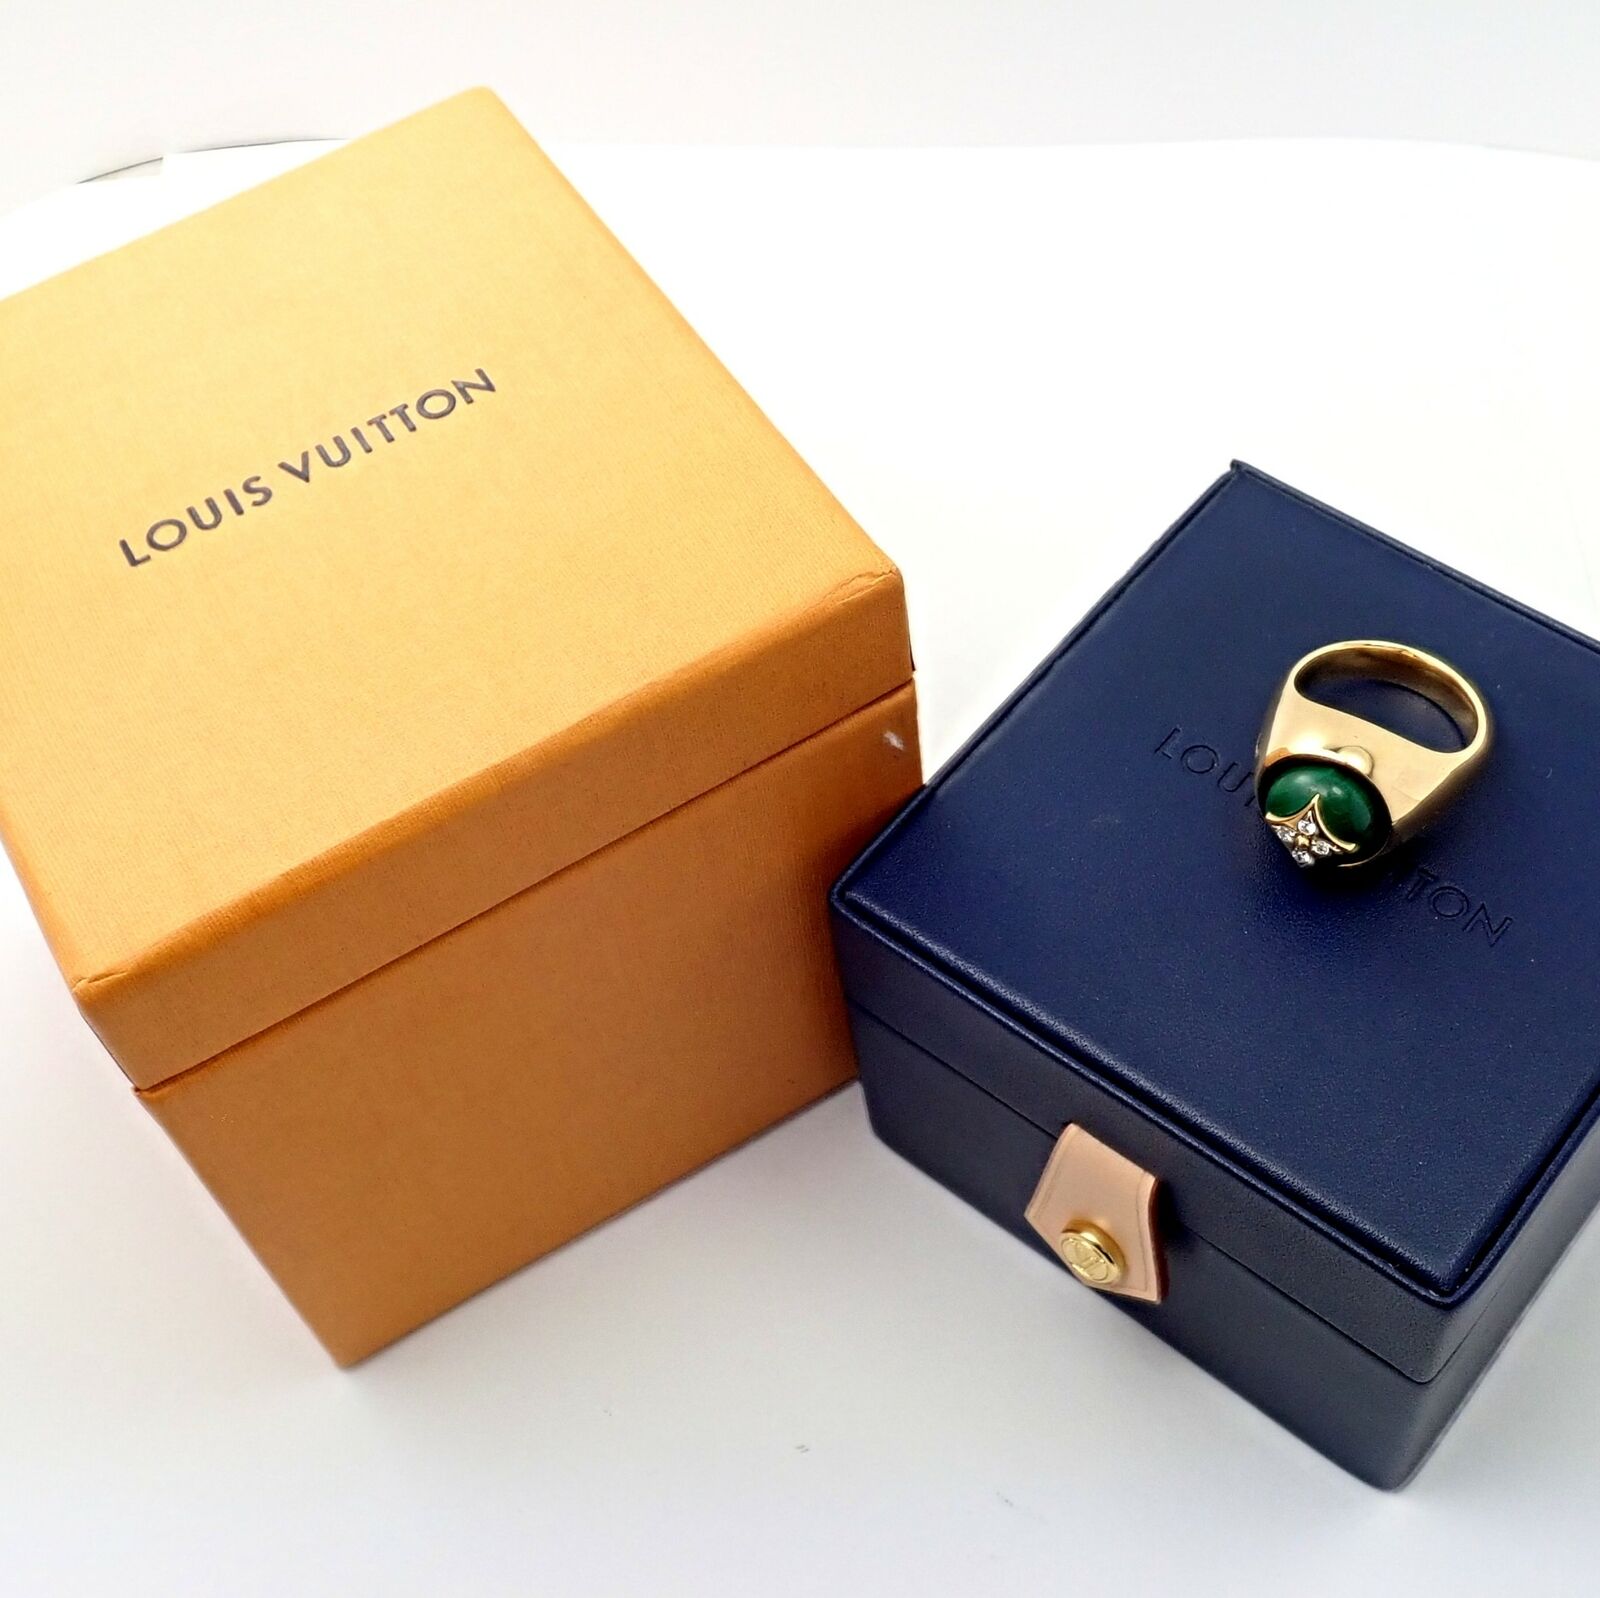 Louis Vuitton Color Blossom Ring Rose Gold Malachite Green And